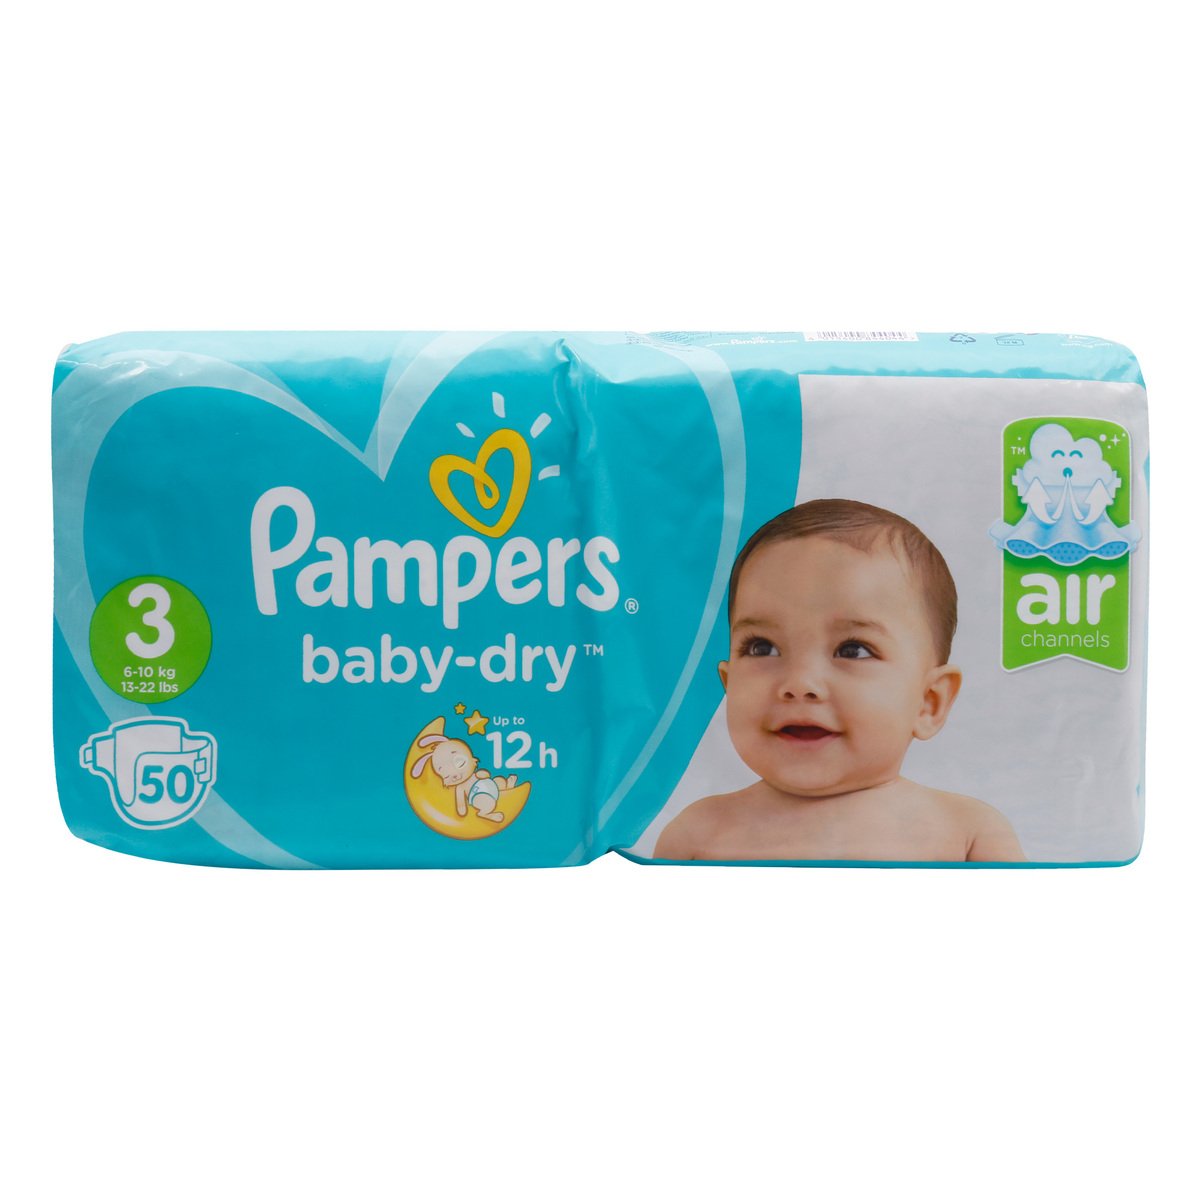 Pampers Baby Dry Diaper Size 3 6-10kg 50pcs